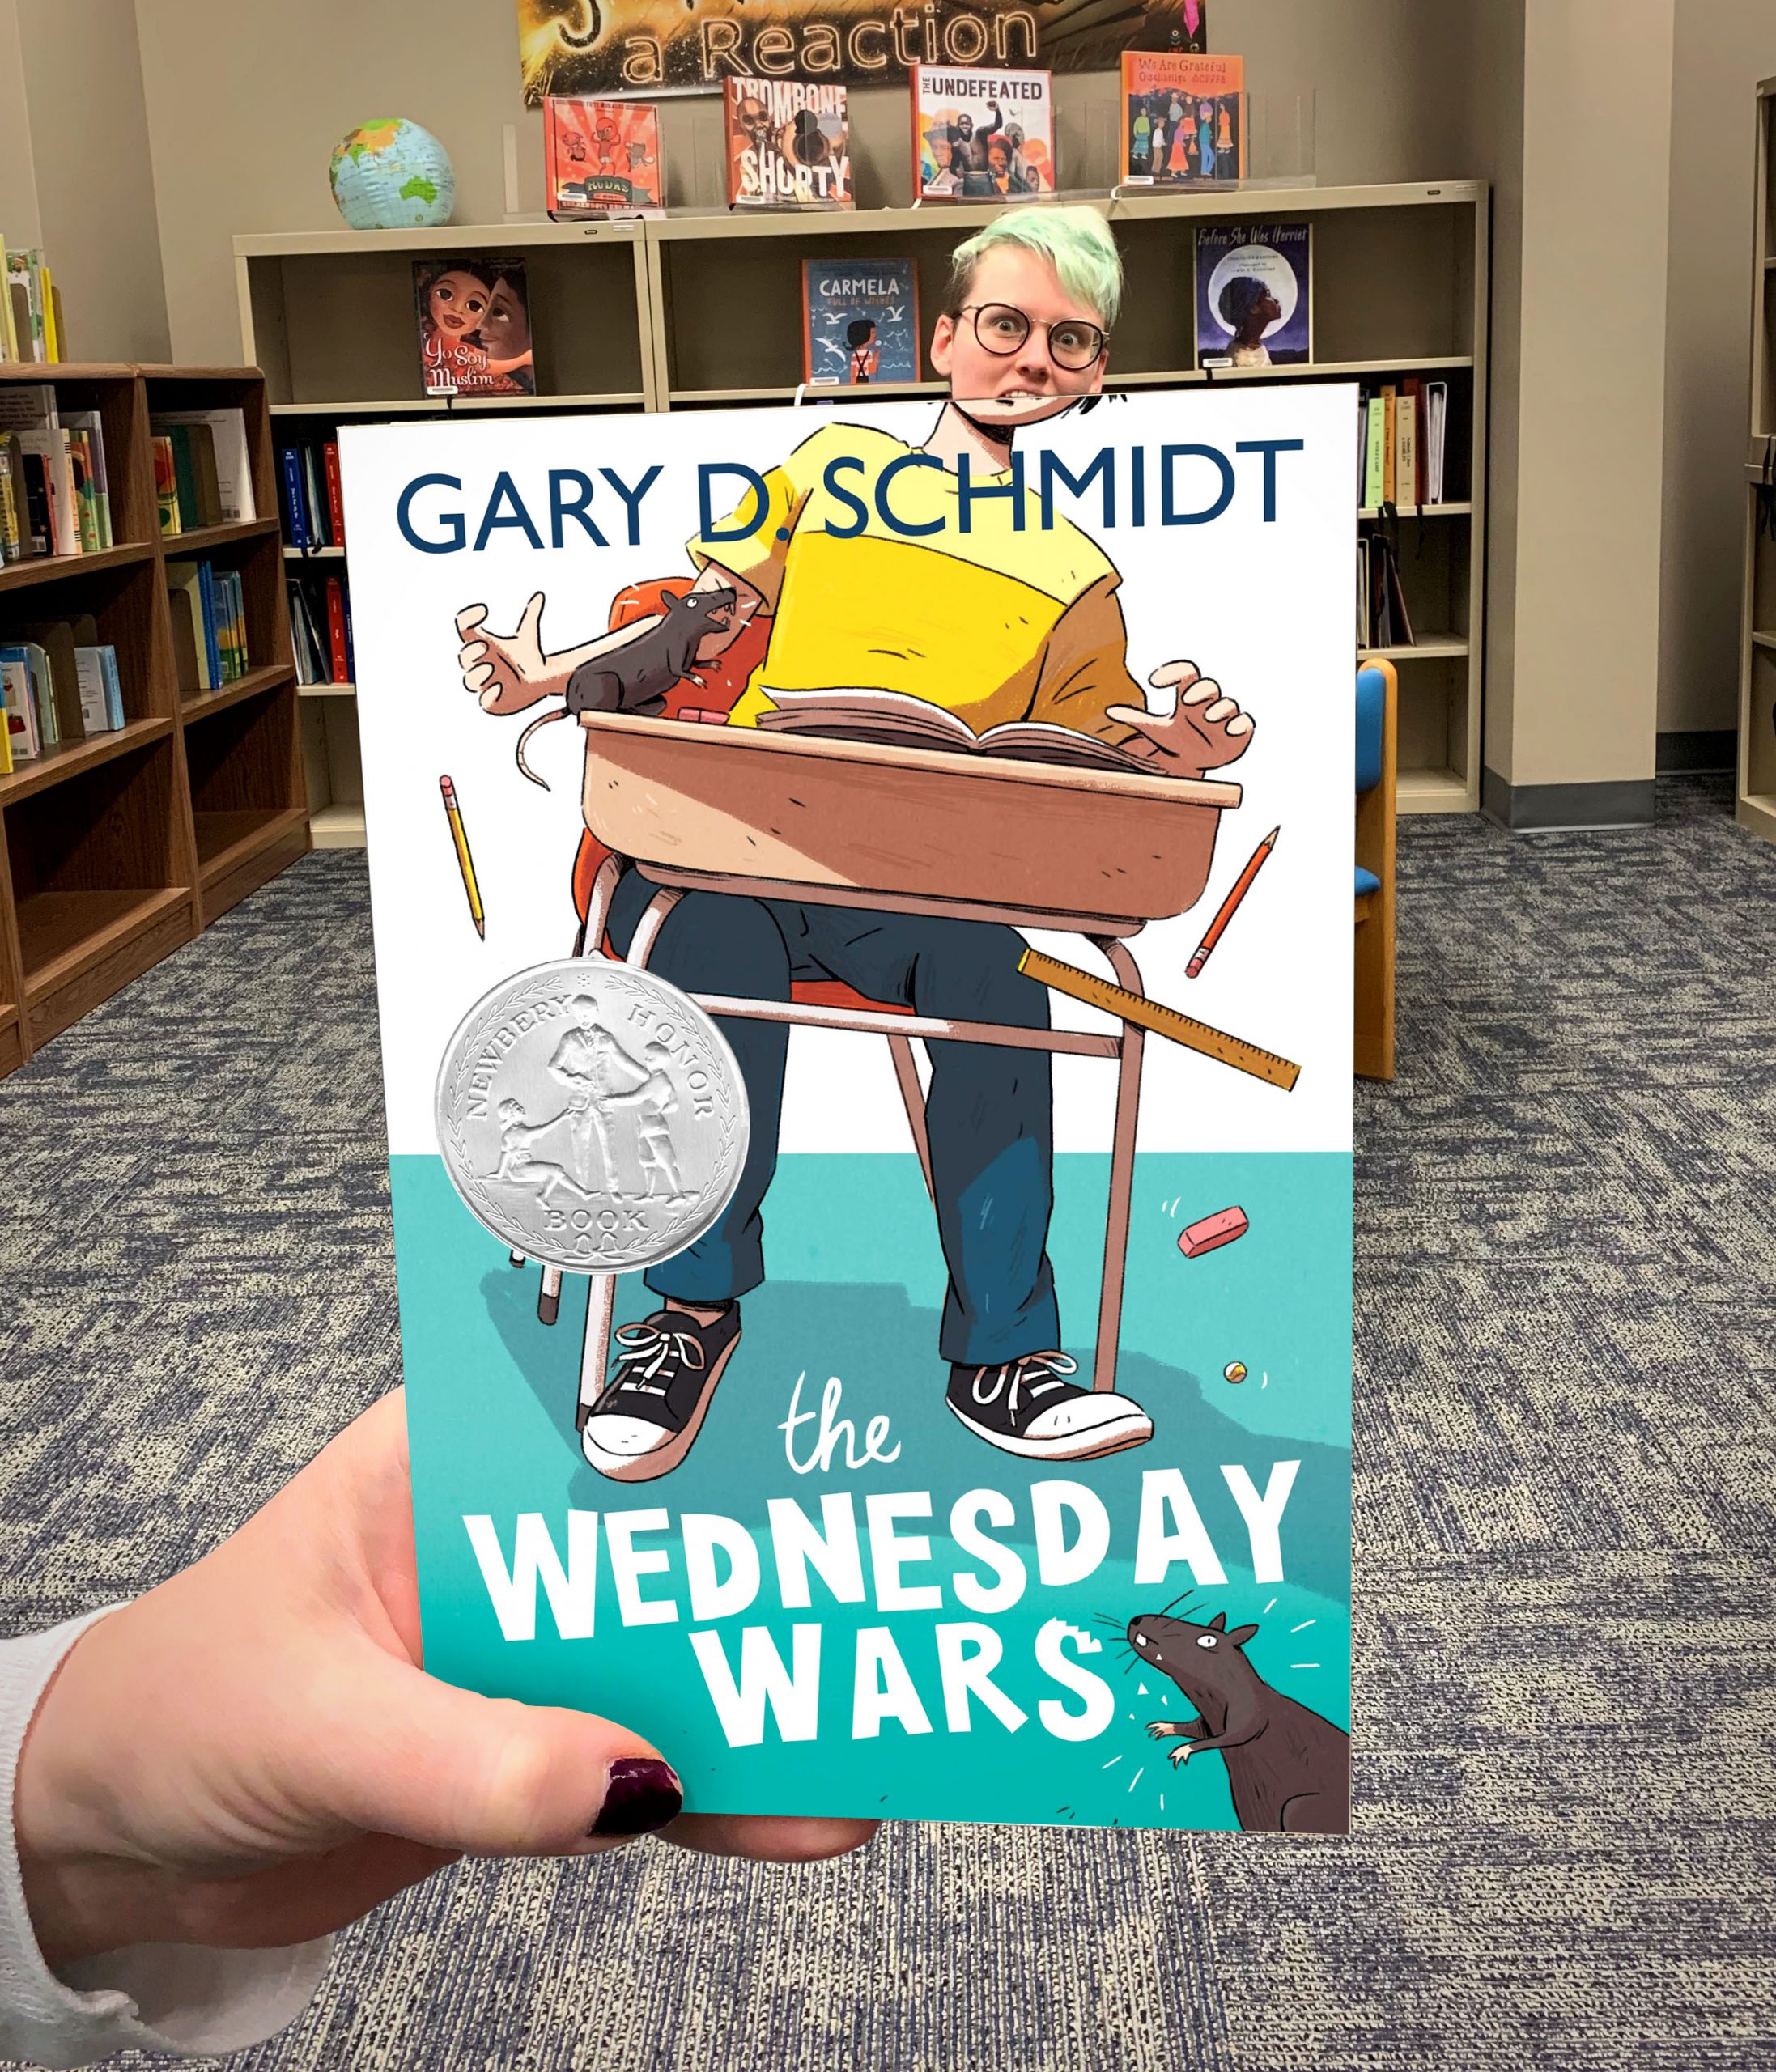 "The Wednesday Wars" by Gary D. Schmidt Bookface photo